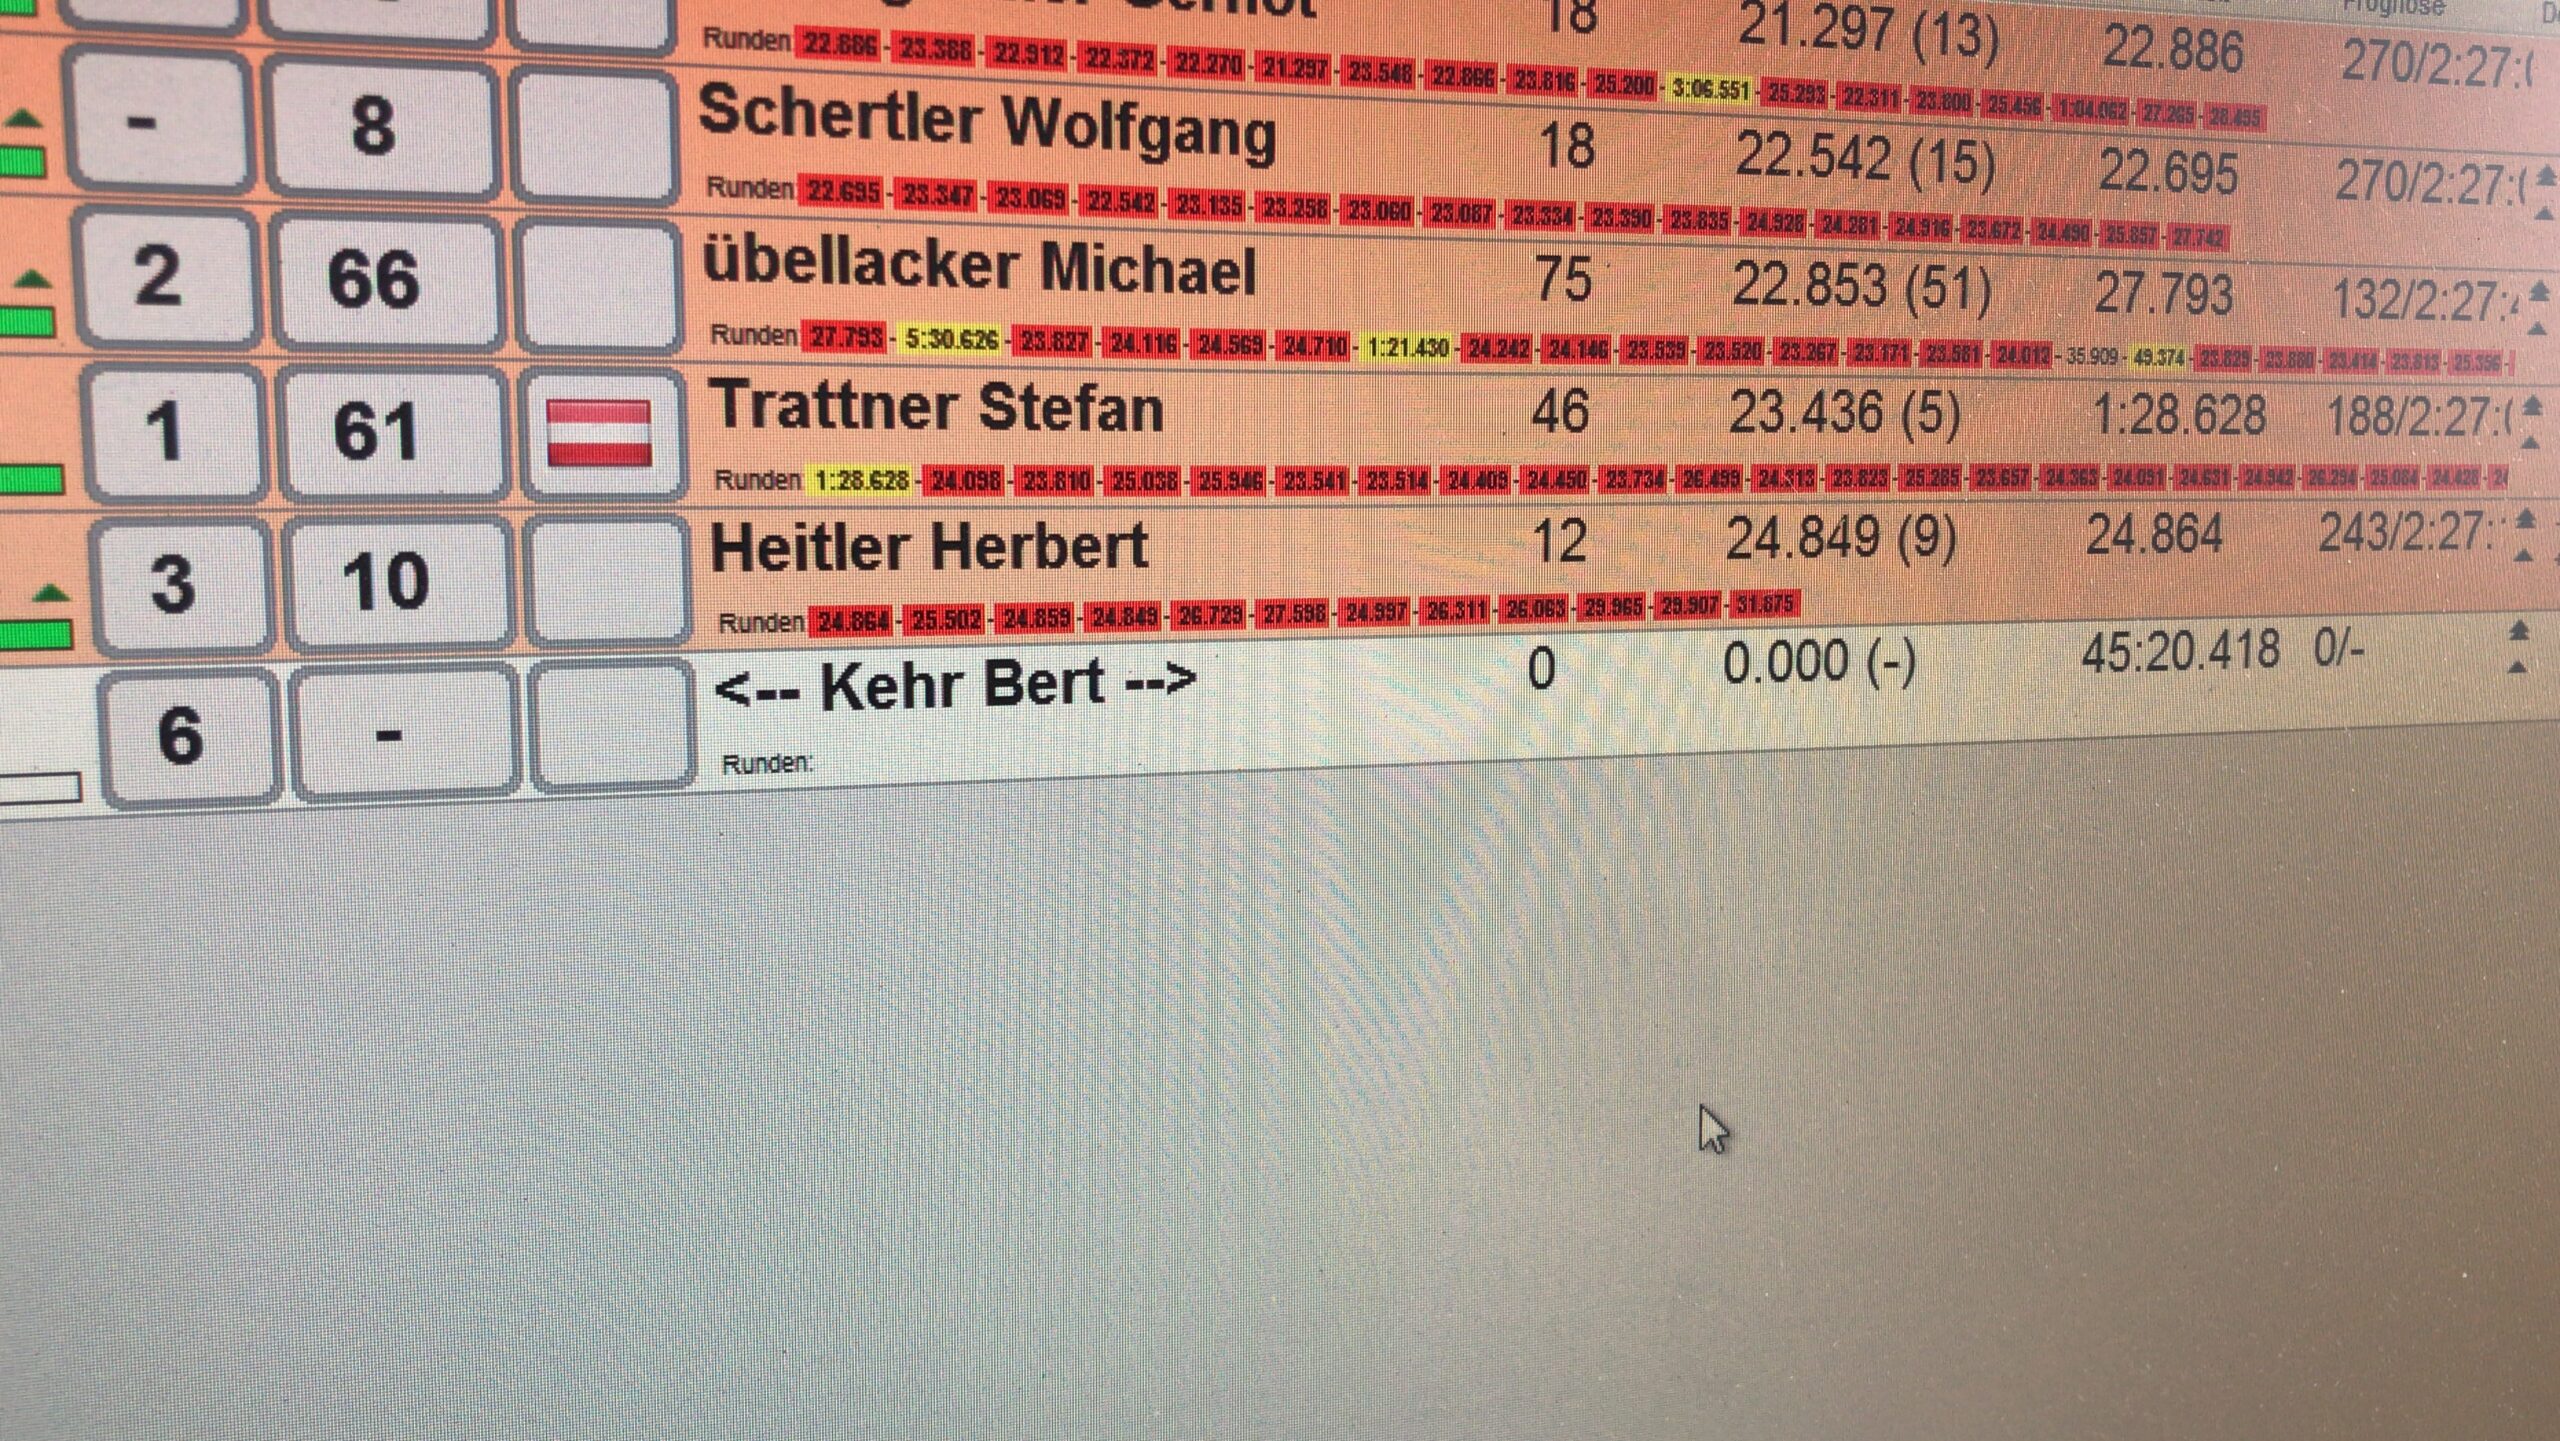 Kehr Bert is on the track ….